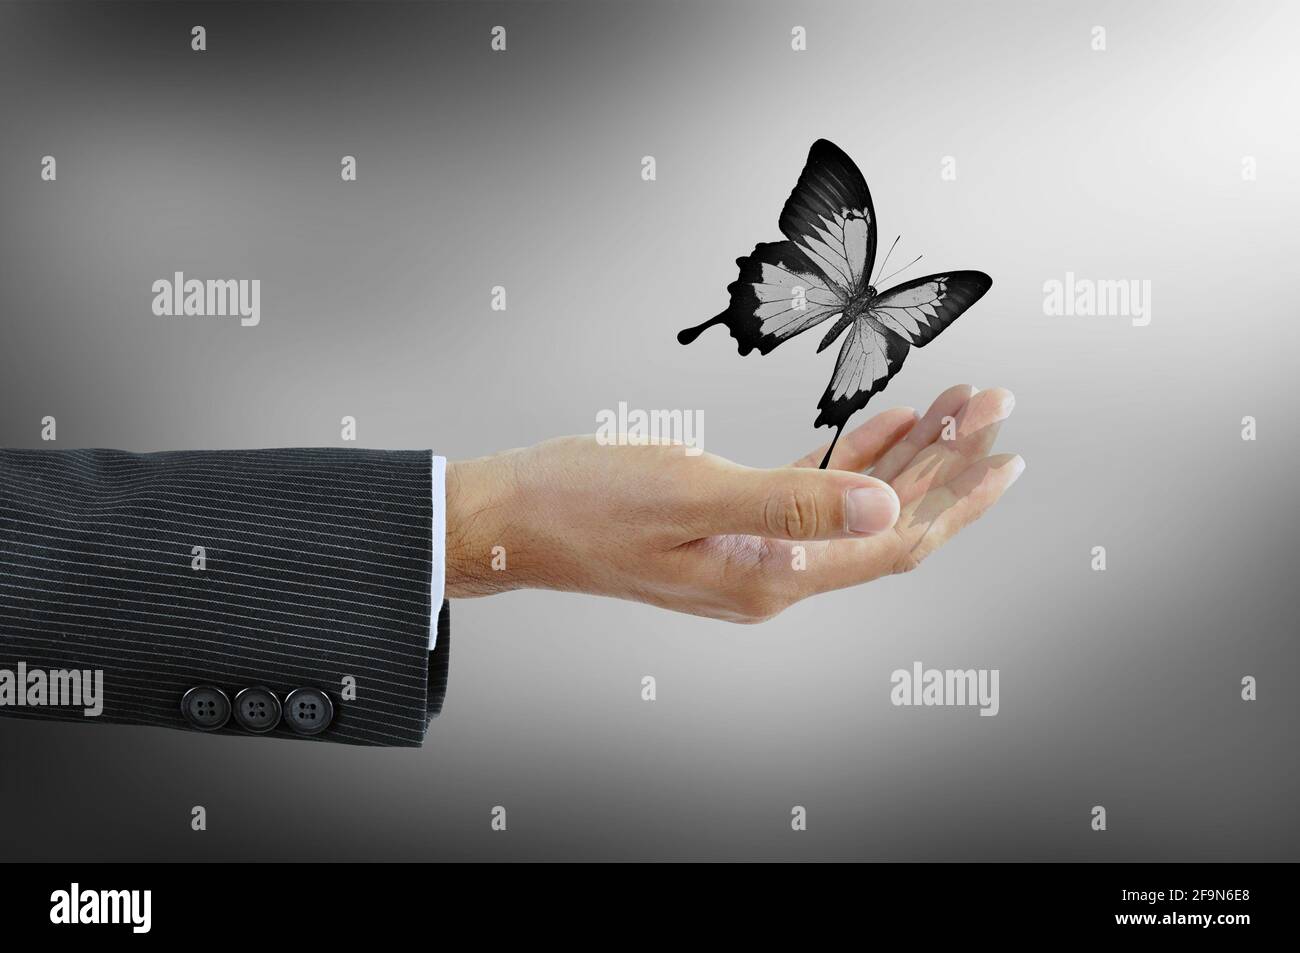 Hand releaasing a butterfly  - business abstract Stock Photo